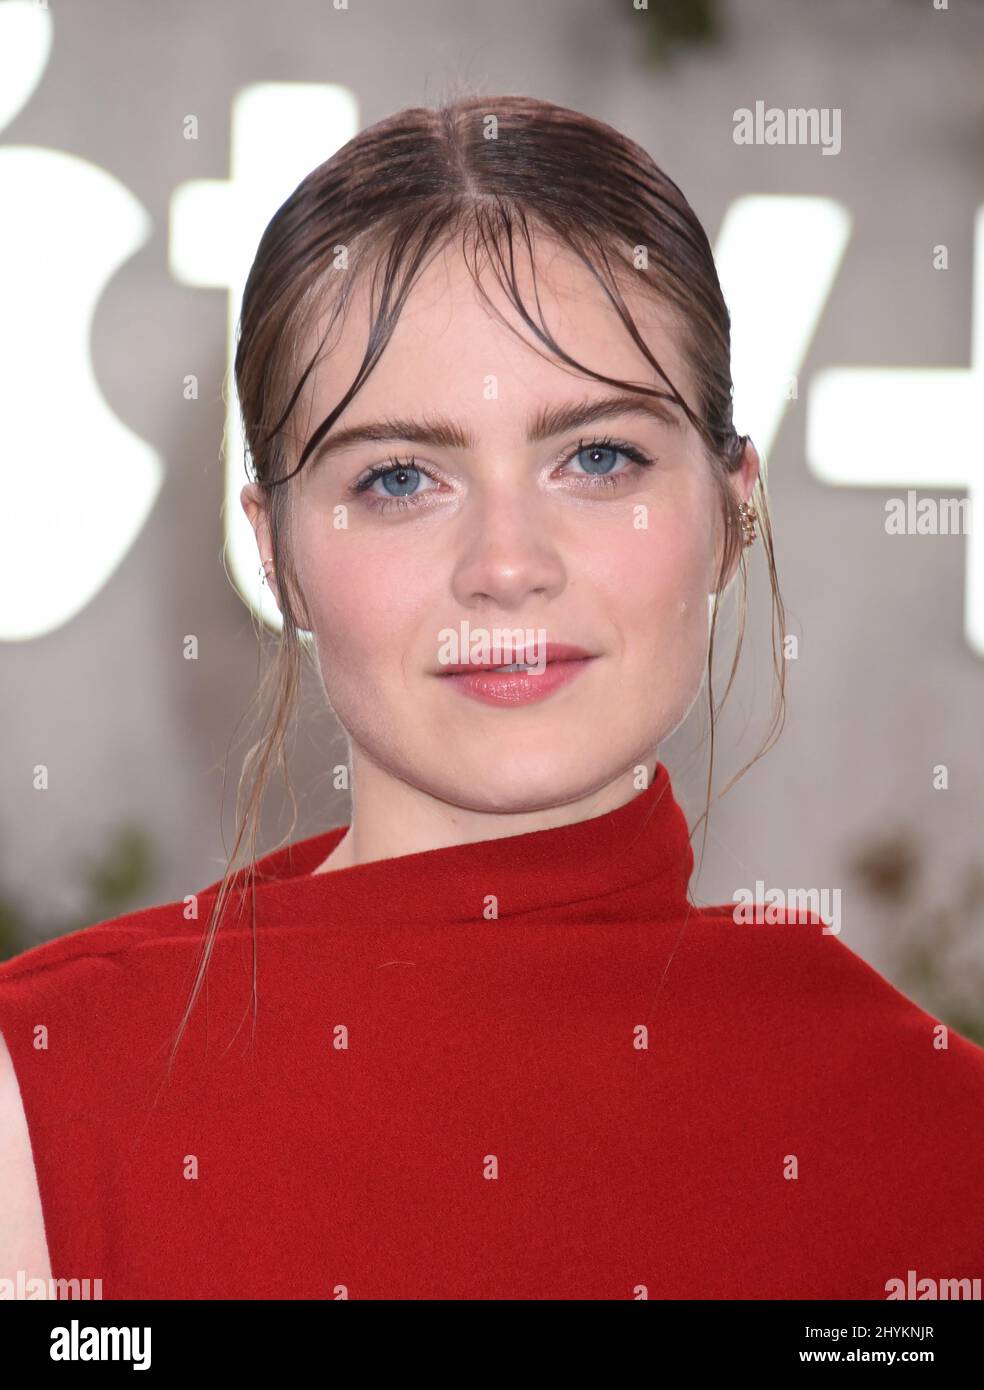 Hera Hilmar at Apple TV+'s 'See' World Premiere held at the Regency Village Theatre on October 21, 2019 in Westwood, CA. Stock Photo